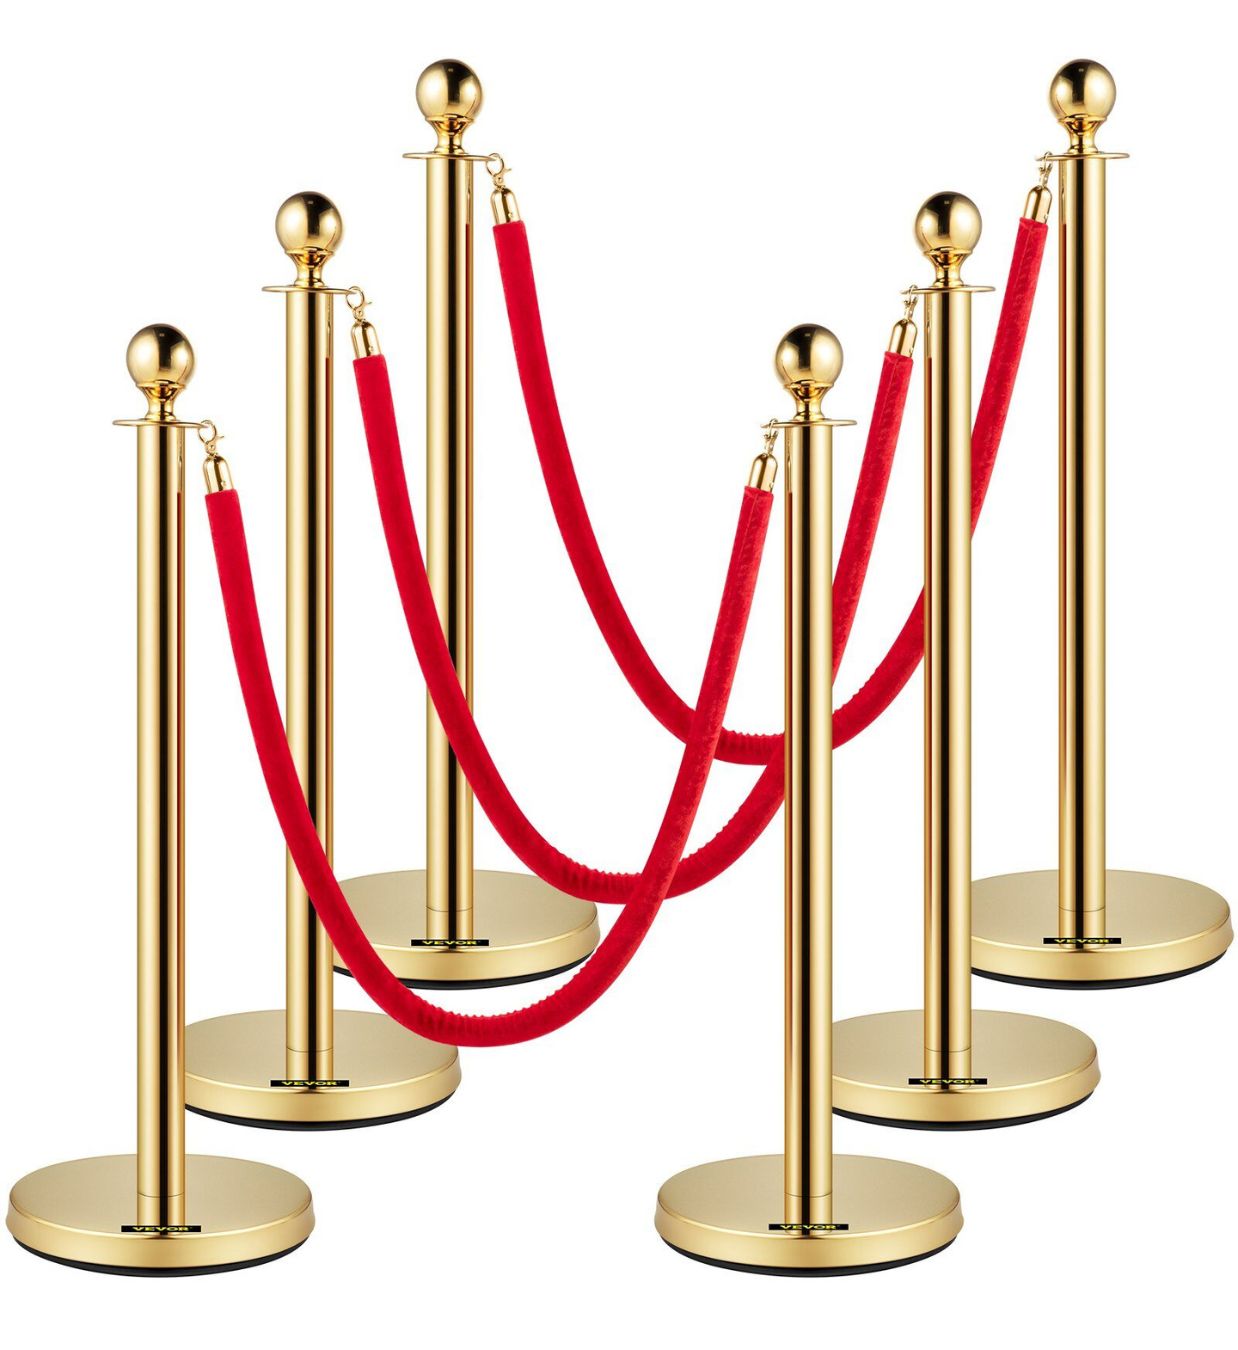 Gold Stanchions Rental